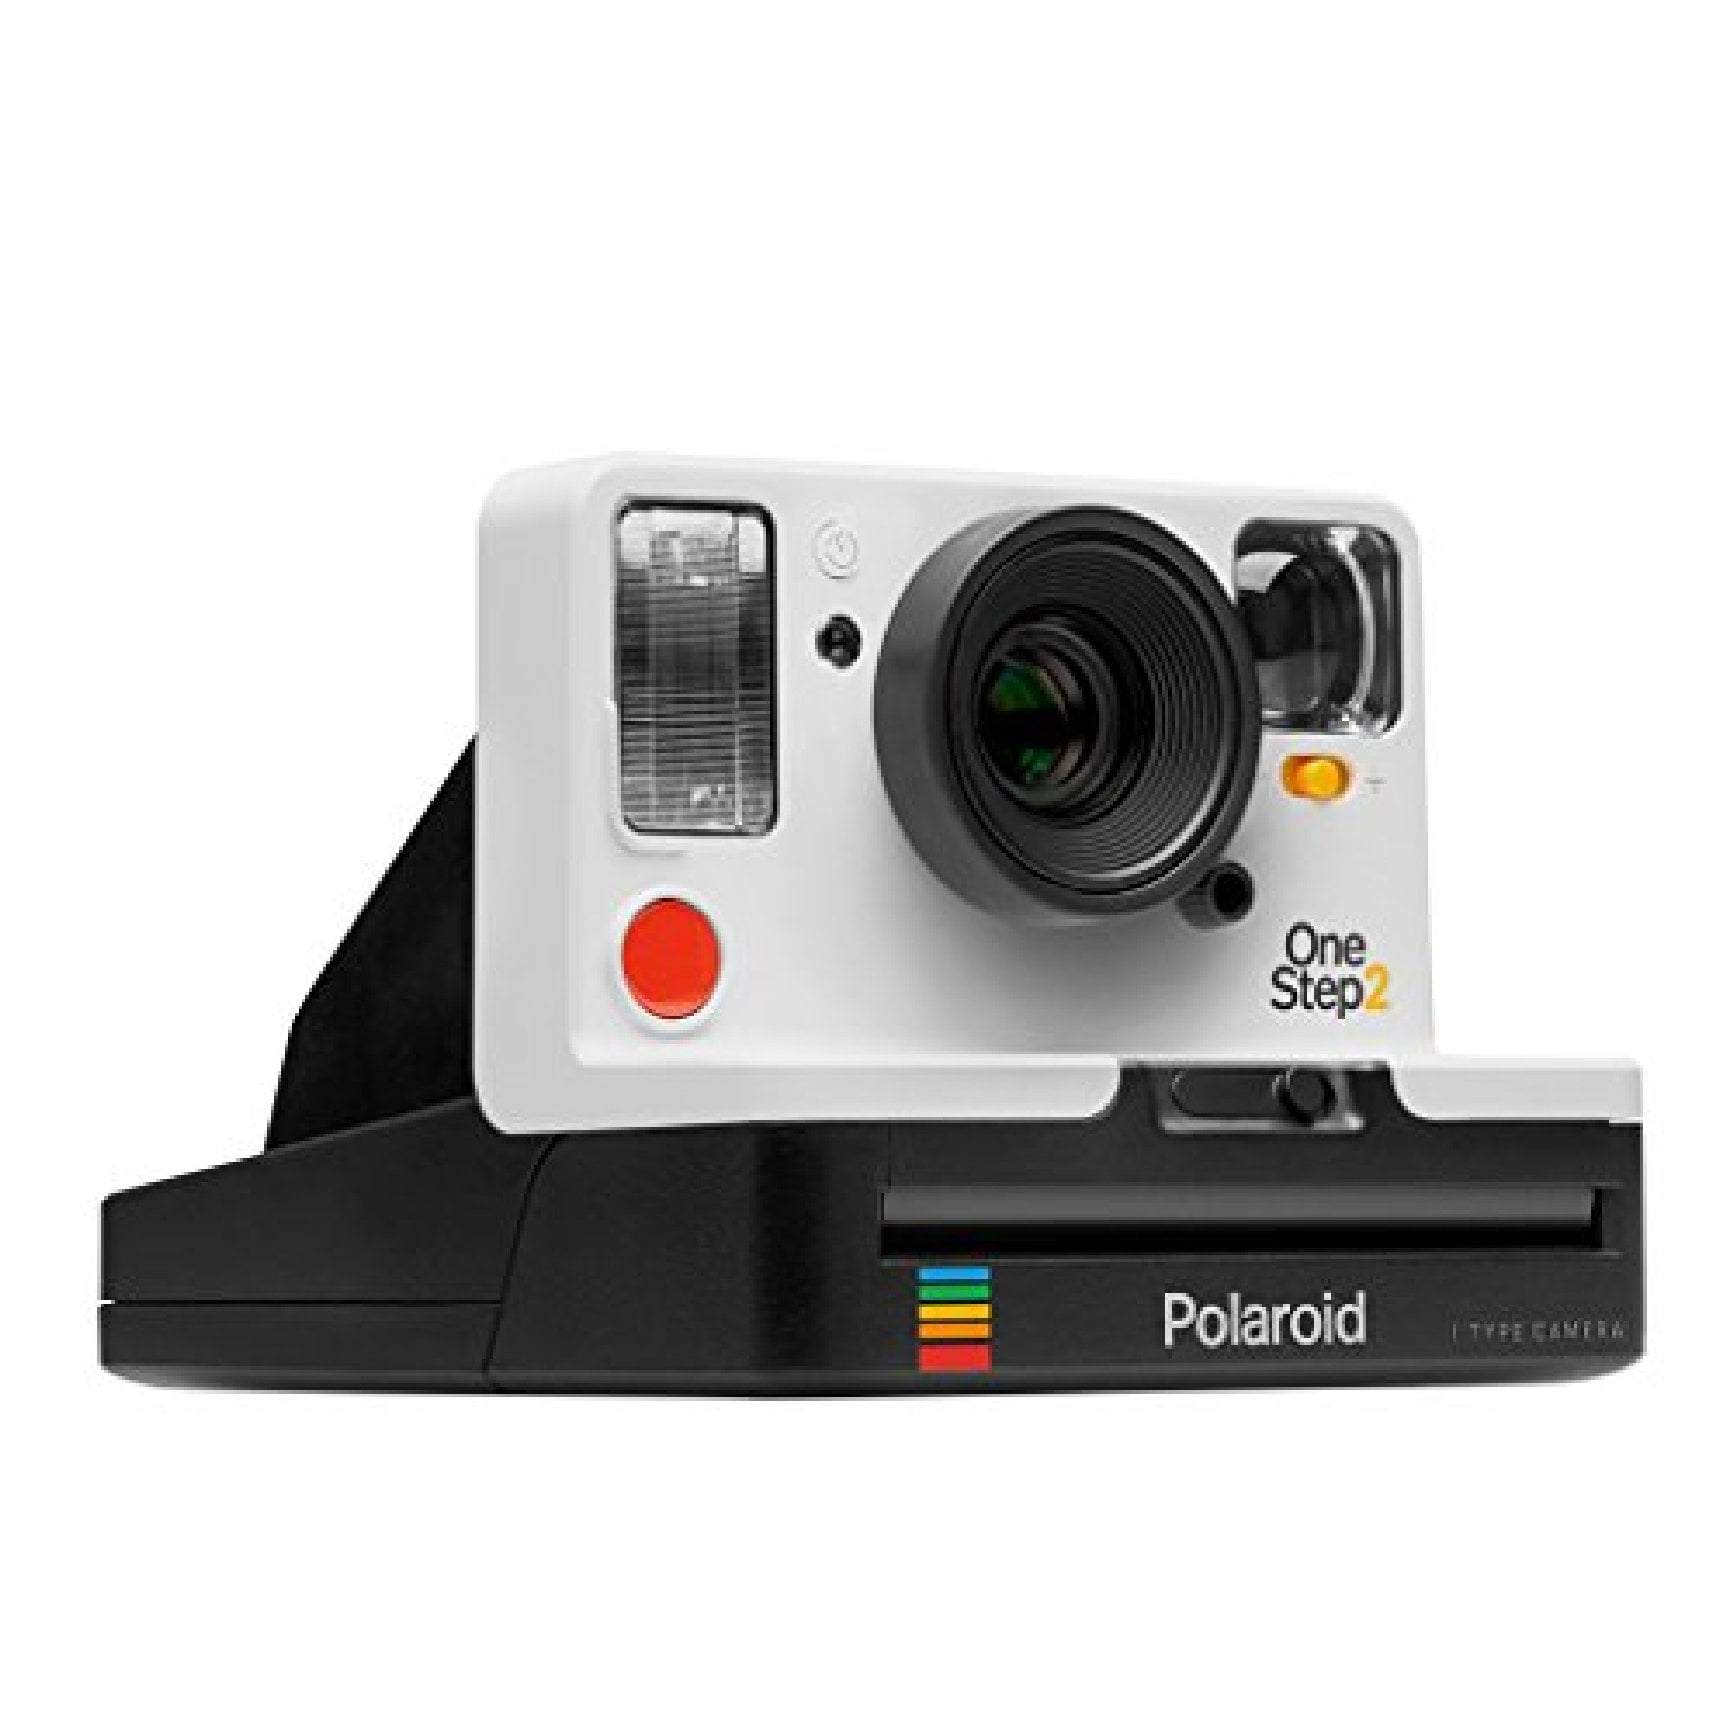 Polaroid OneStep 2 Instant Print Camera - Modern Classic for Unforgettable Instant Photos